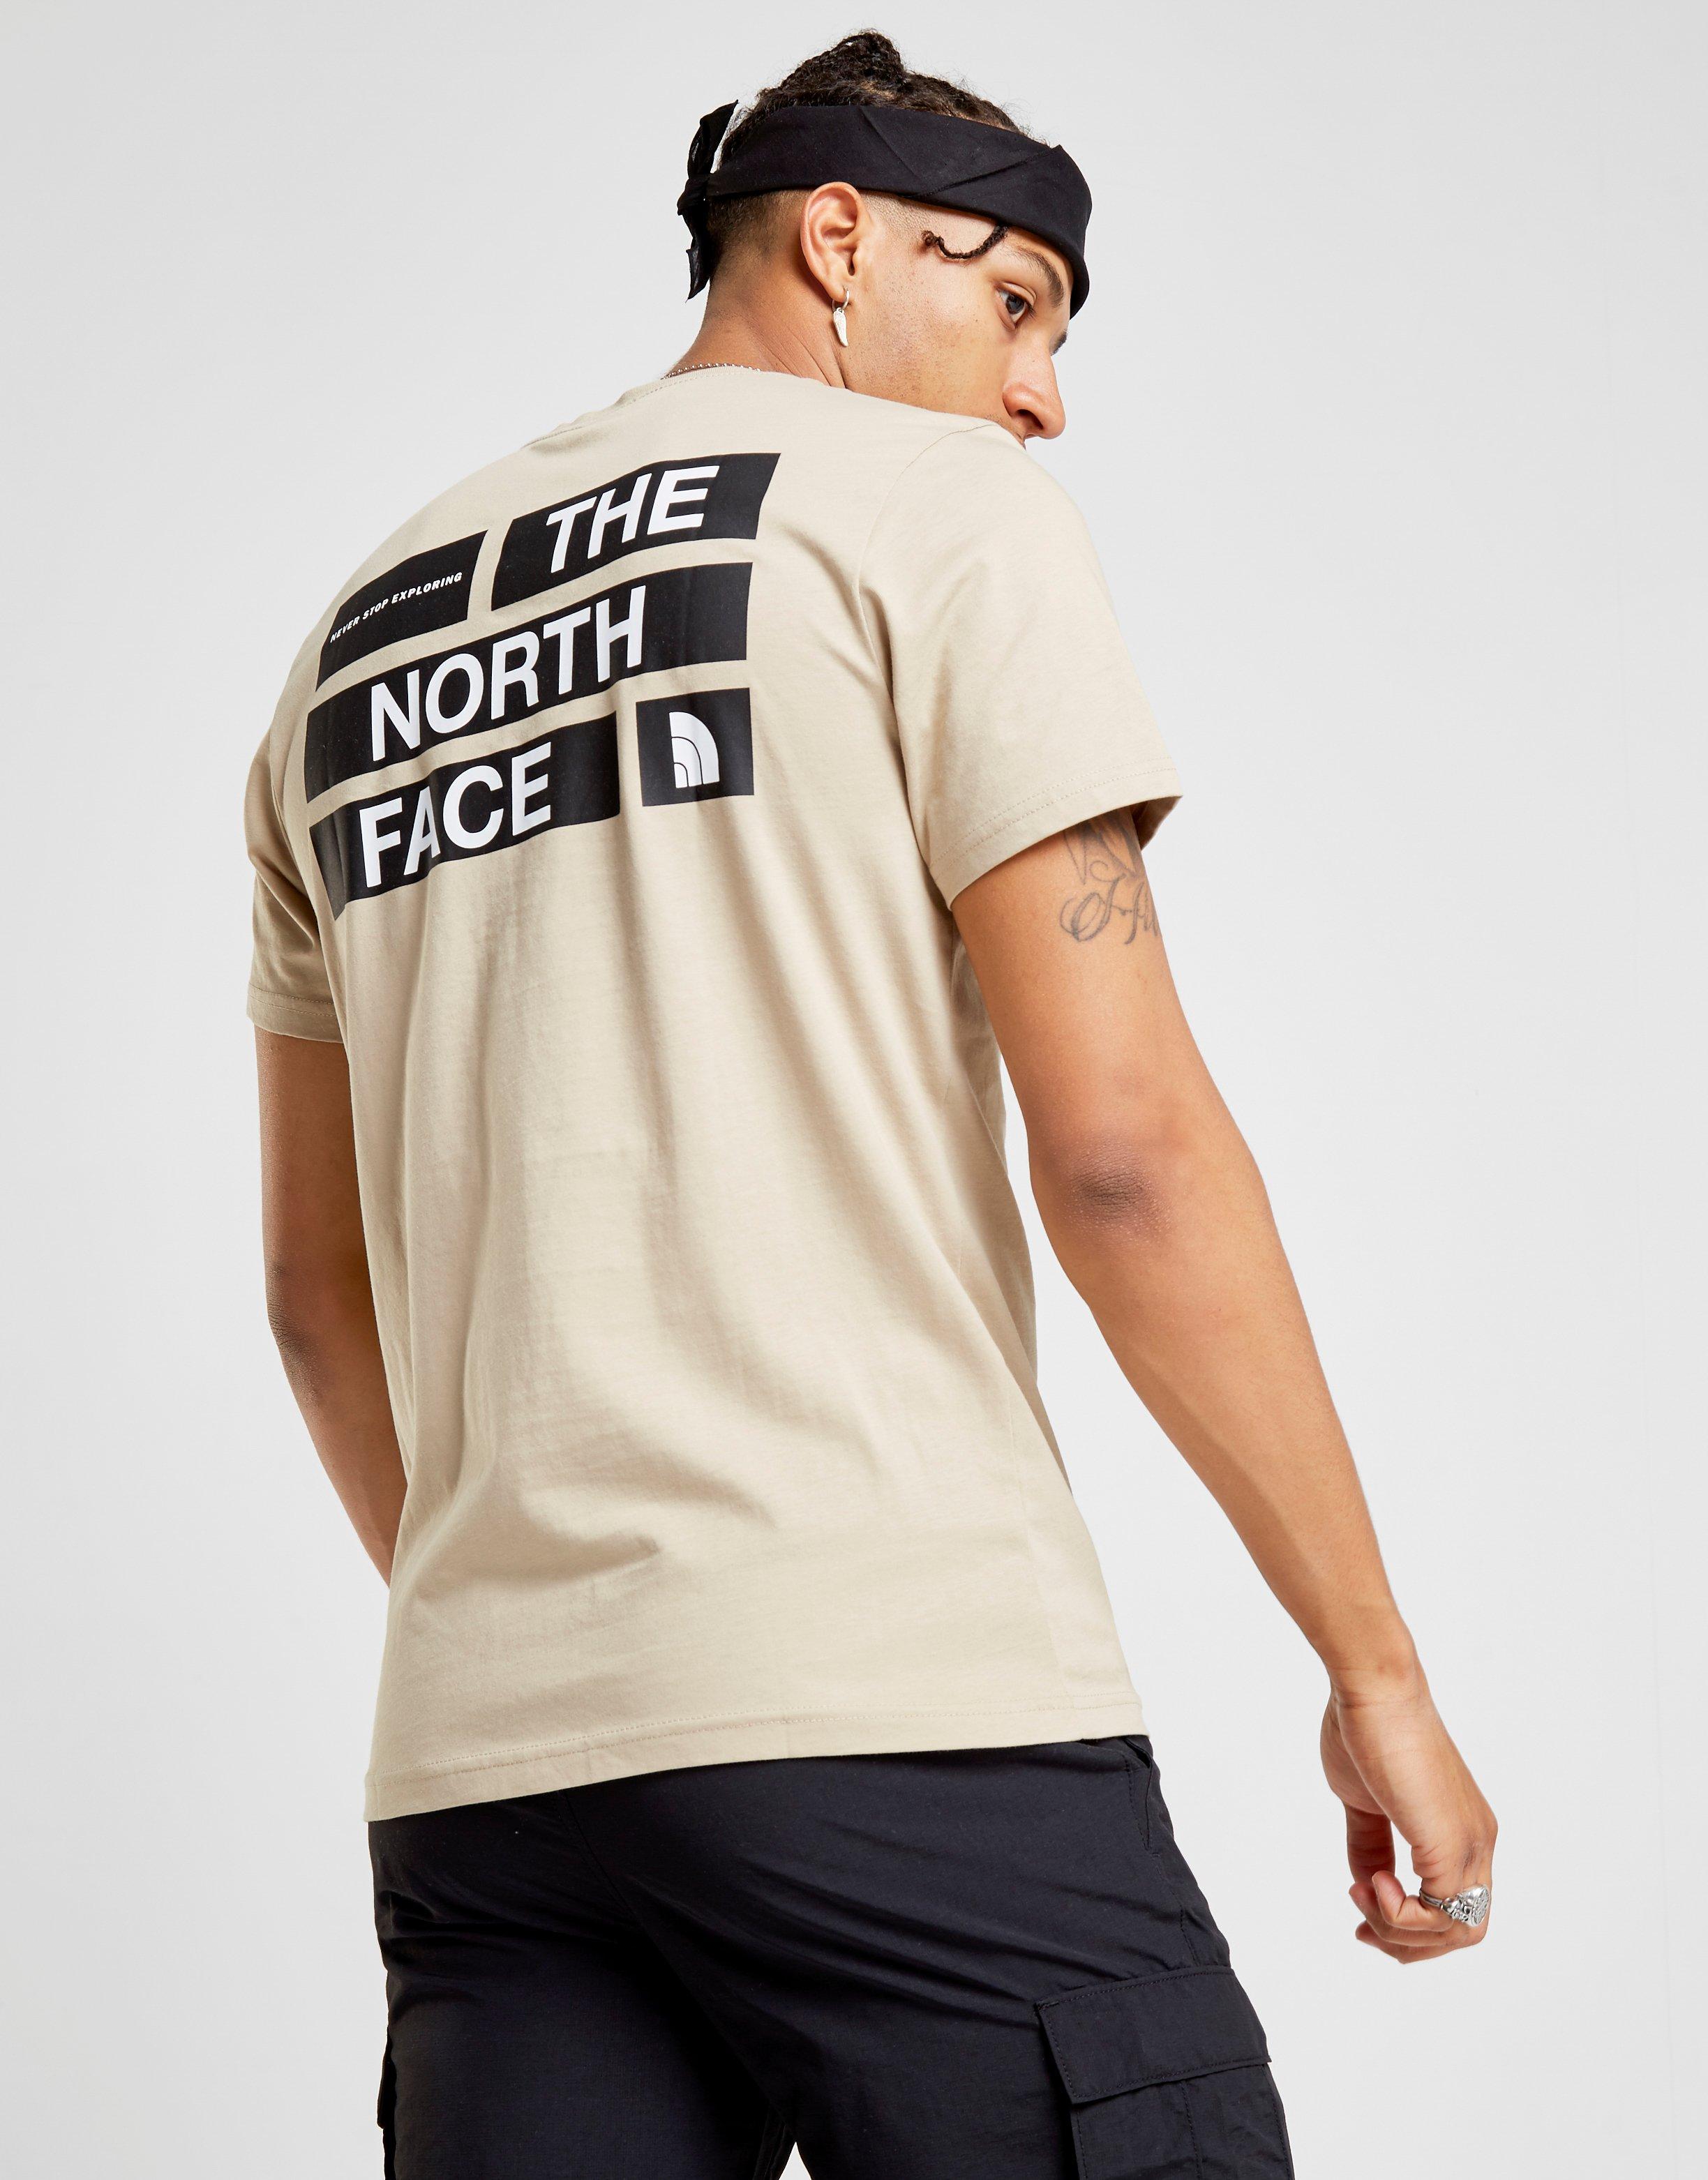 The North Face Cotton Newbox T-shirt in 